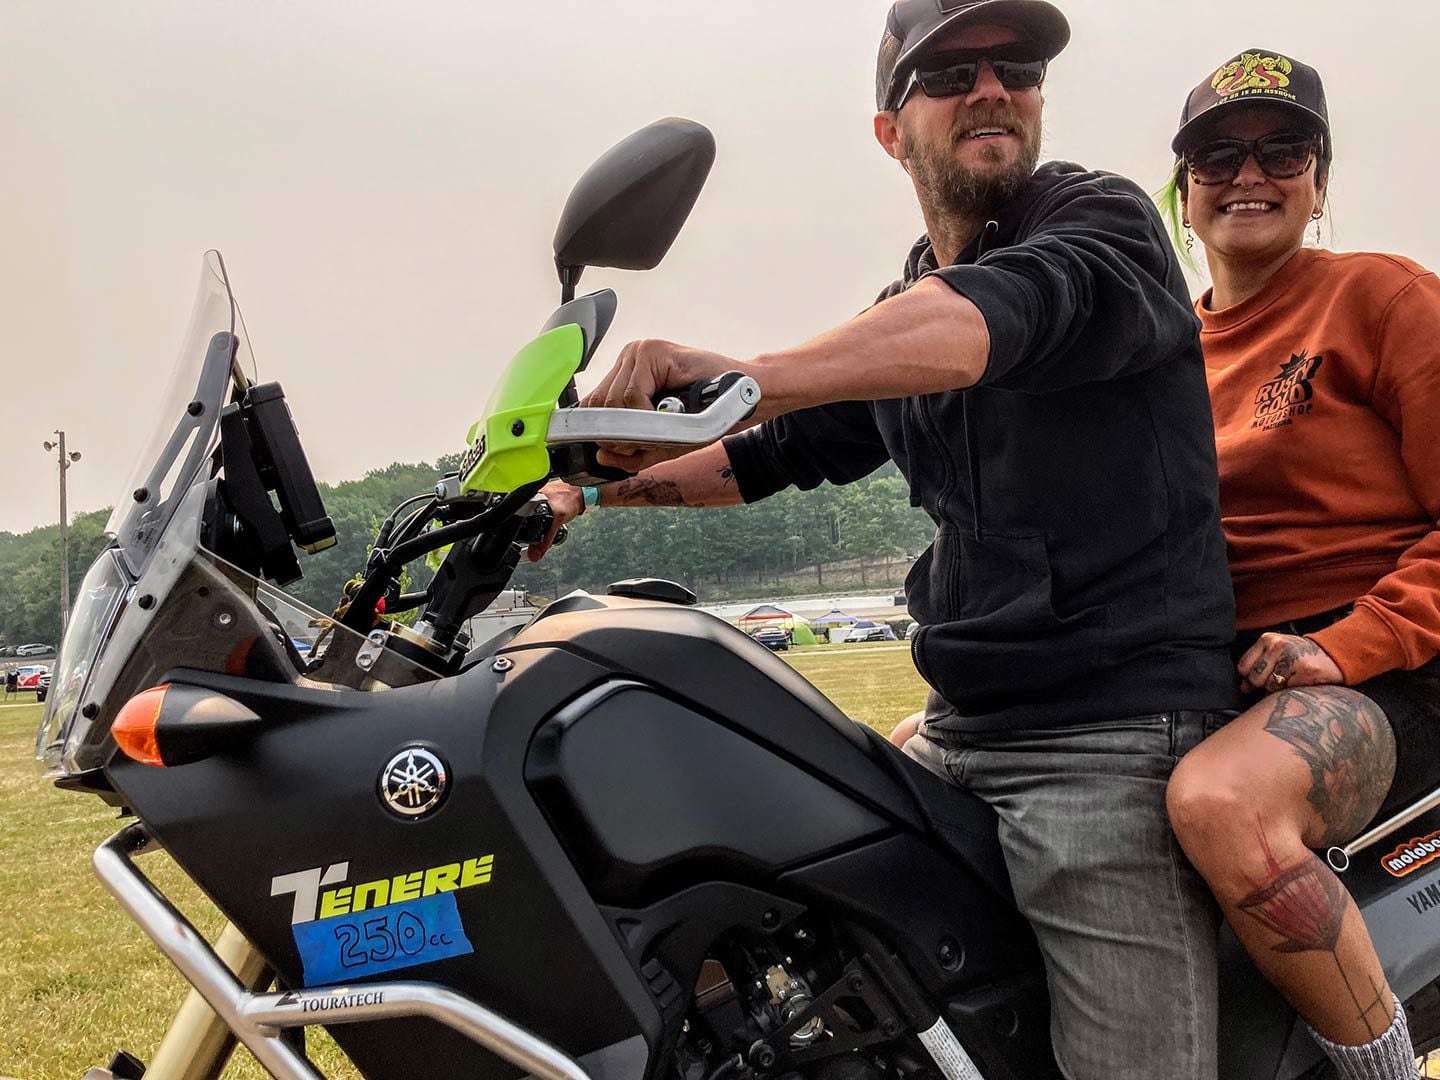 Motobenco’s Ben Clauss and his partner Christina modified their Ténéré to comply with Road America’s new trail rules.